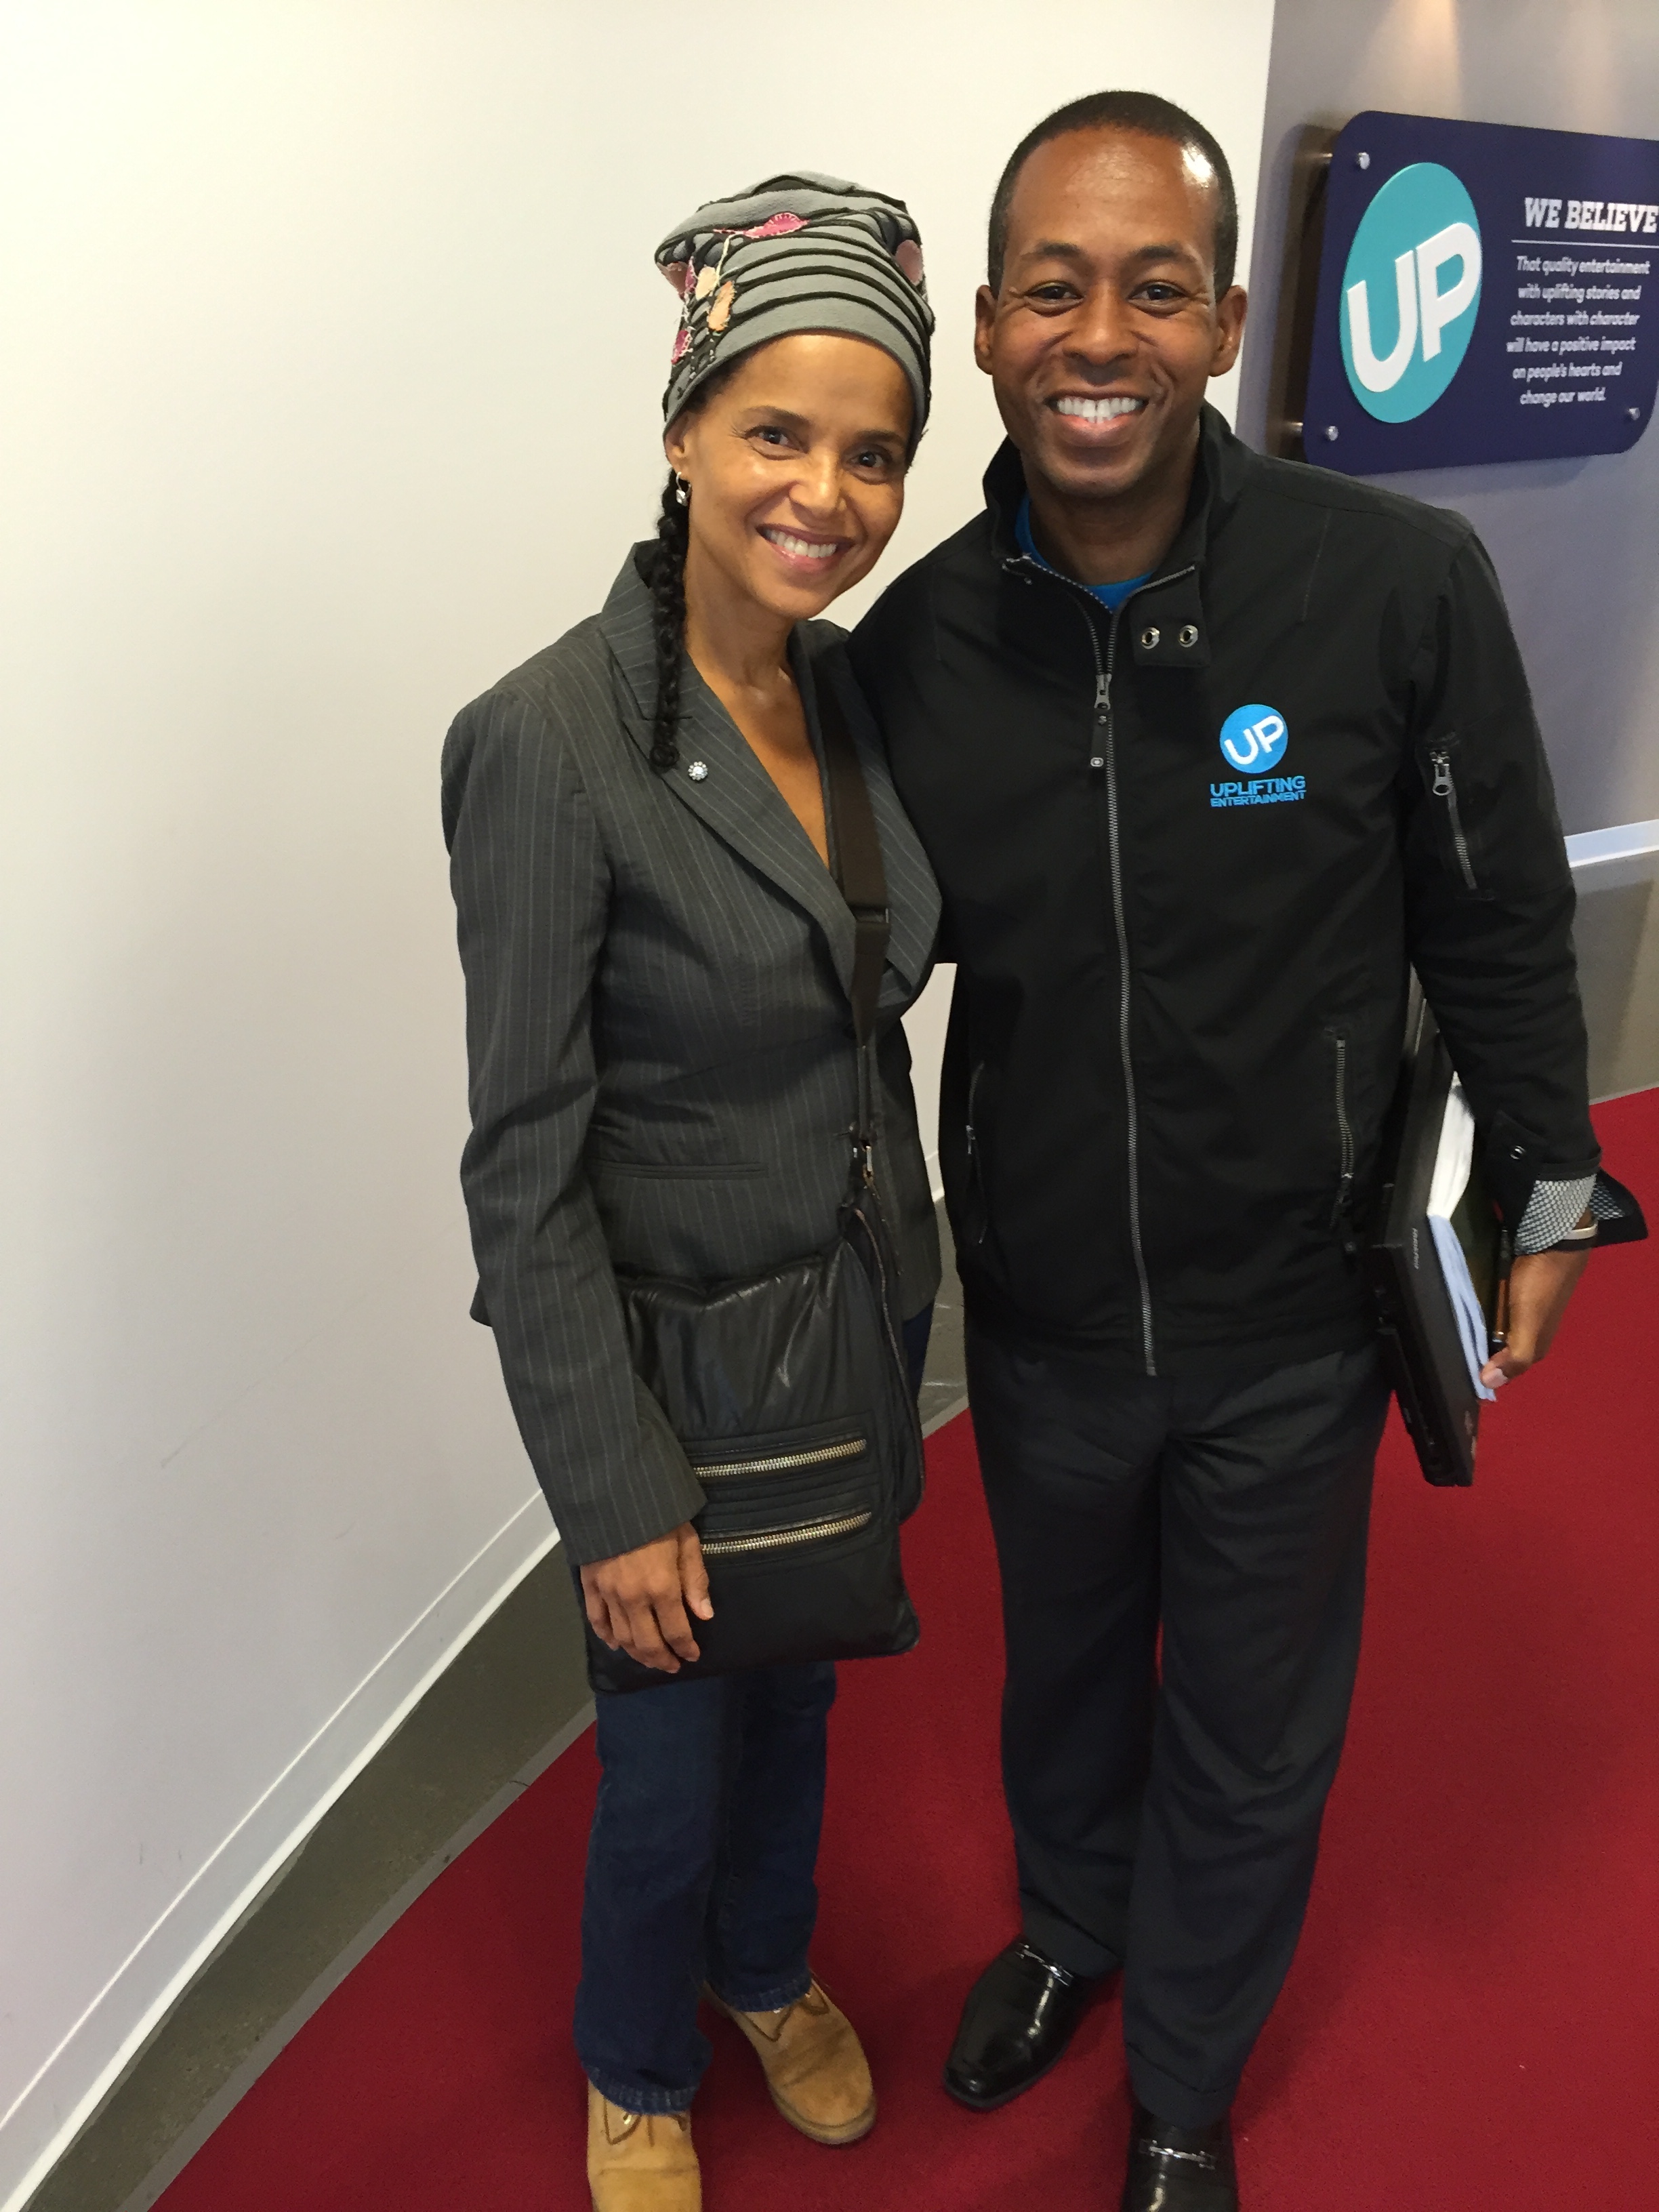 Corey A. Prince and Victoria Rowell at UP/ASPiRE office.